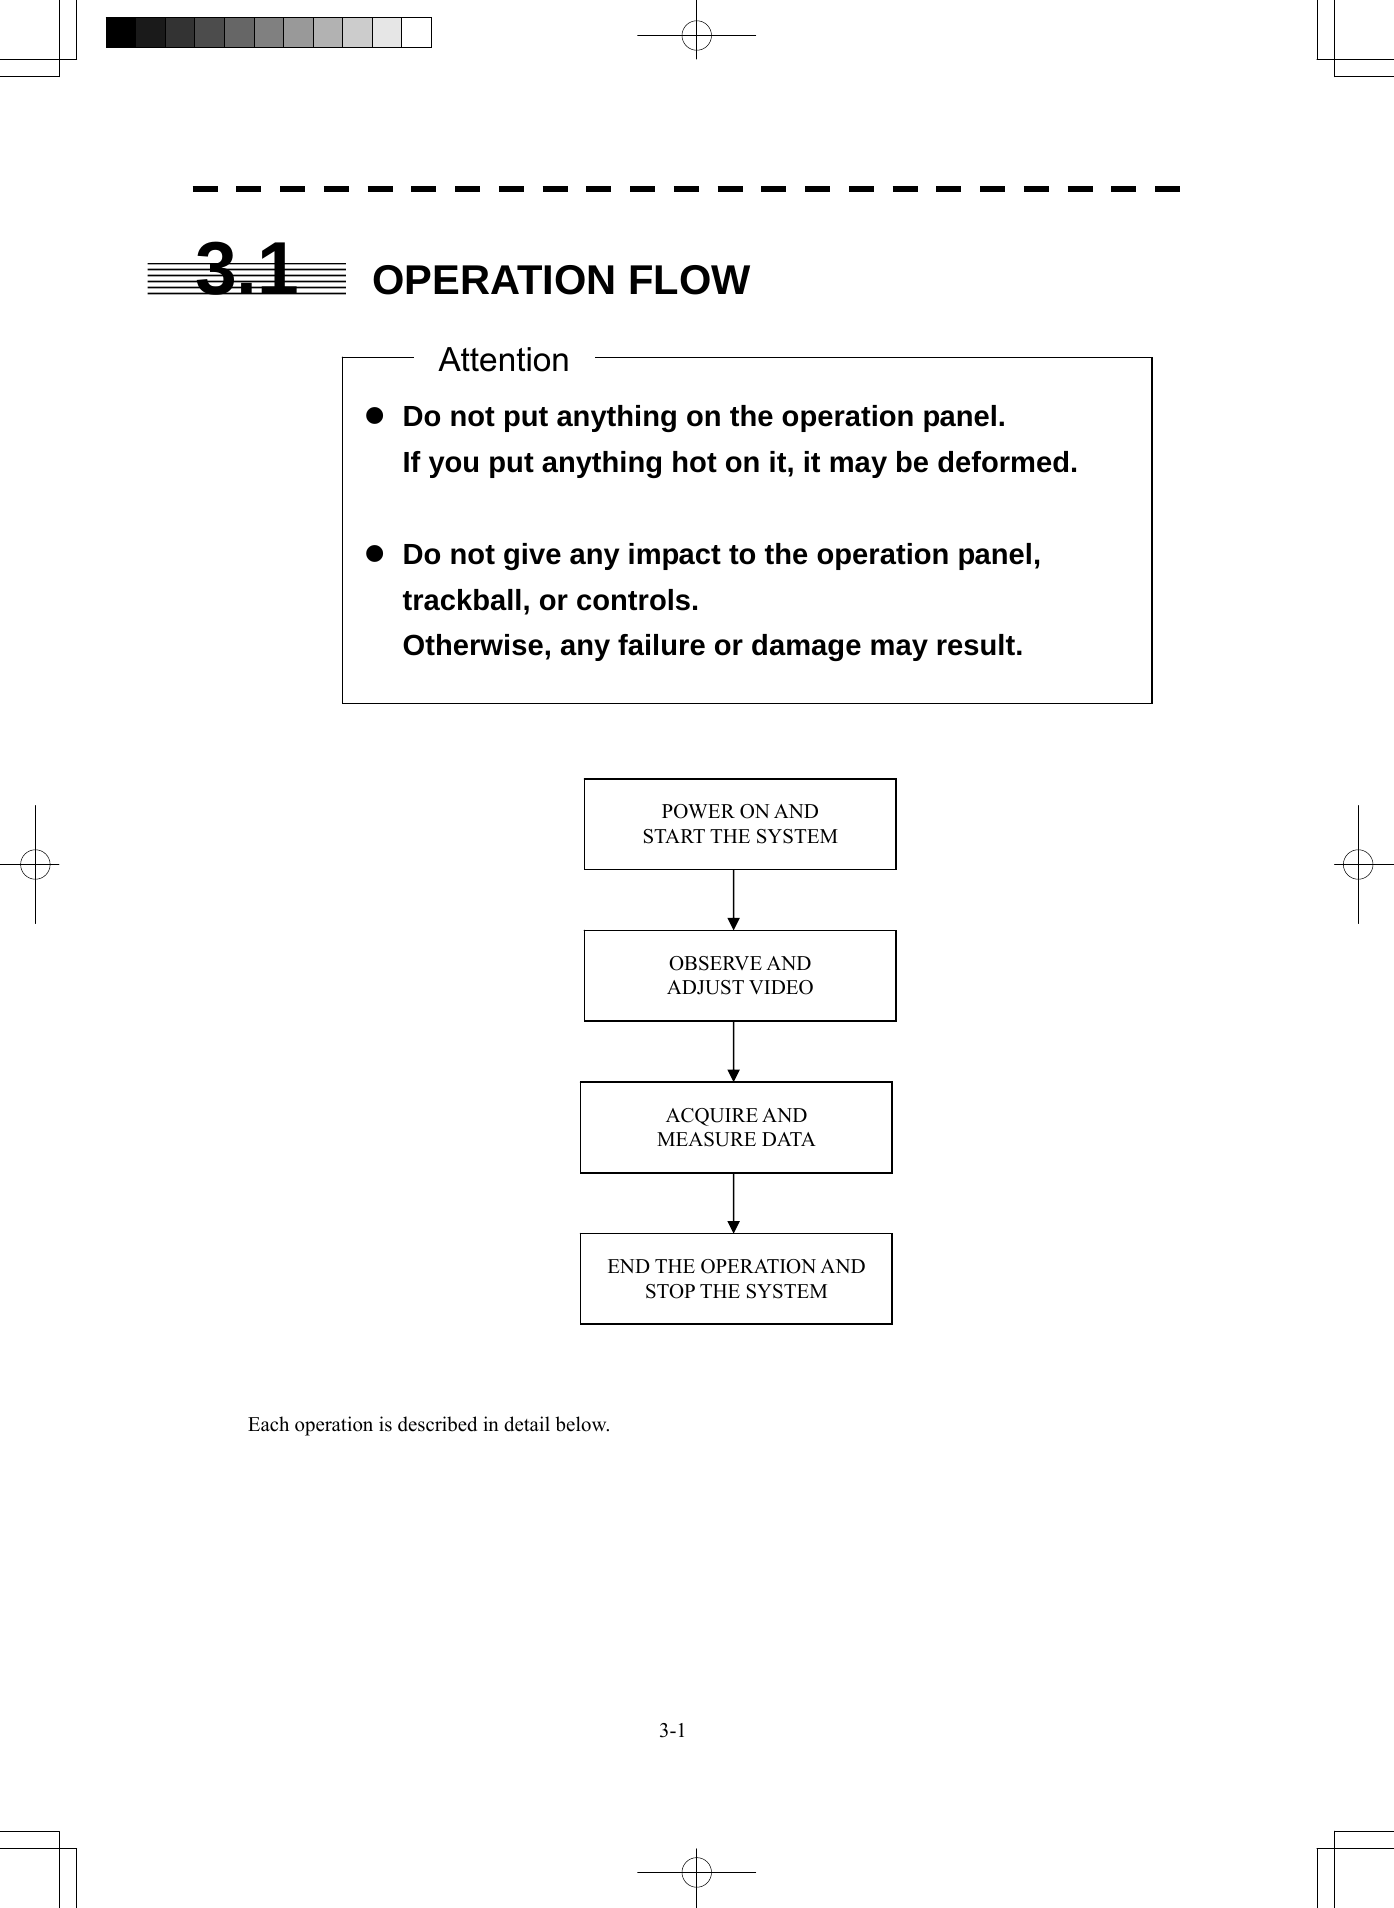  3-1 3.1  OPERATION FLOW                                         Each operation is described in detail below.  z Do not put anything on the operation panel. If you put anything hot on it, it may be deformed.  z Do not give any impact to the operation panel, trackball, or controls. Otherwise, any failure or damage may result. Attention POWER ON AND START THE SYSTEM OBSERVE AND   ADJUST VIDEO ACQUIRE AND   MEASURE DATA END THE OPERATION AND STOP THE SYSTEM 